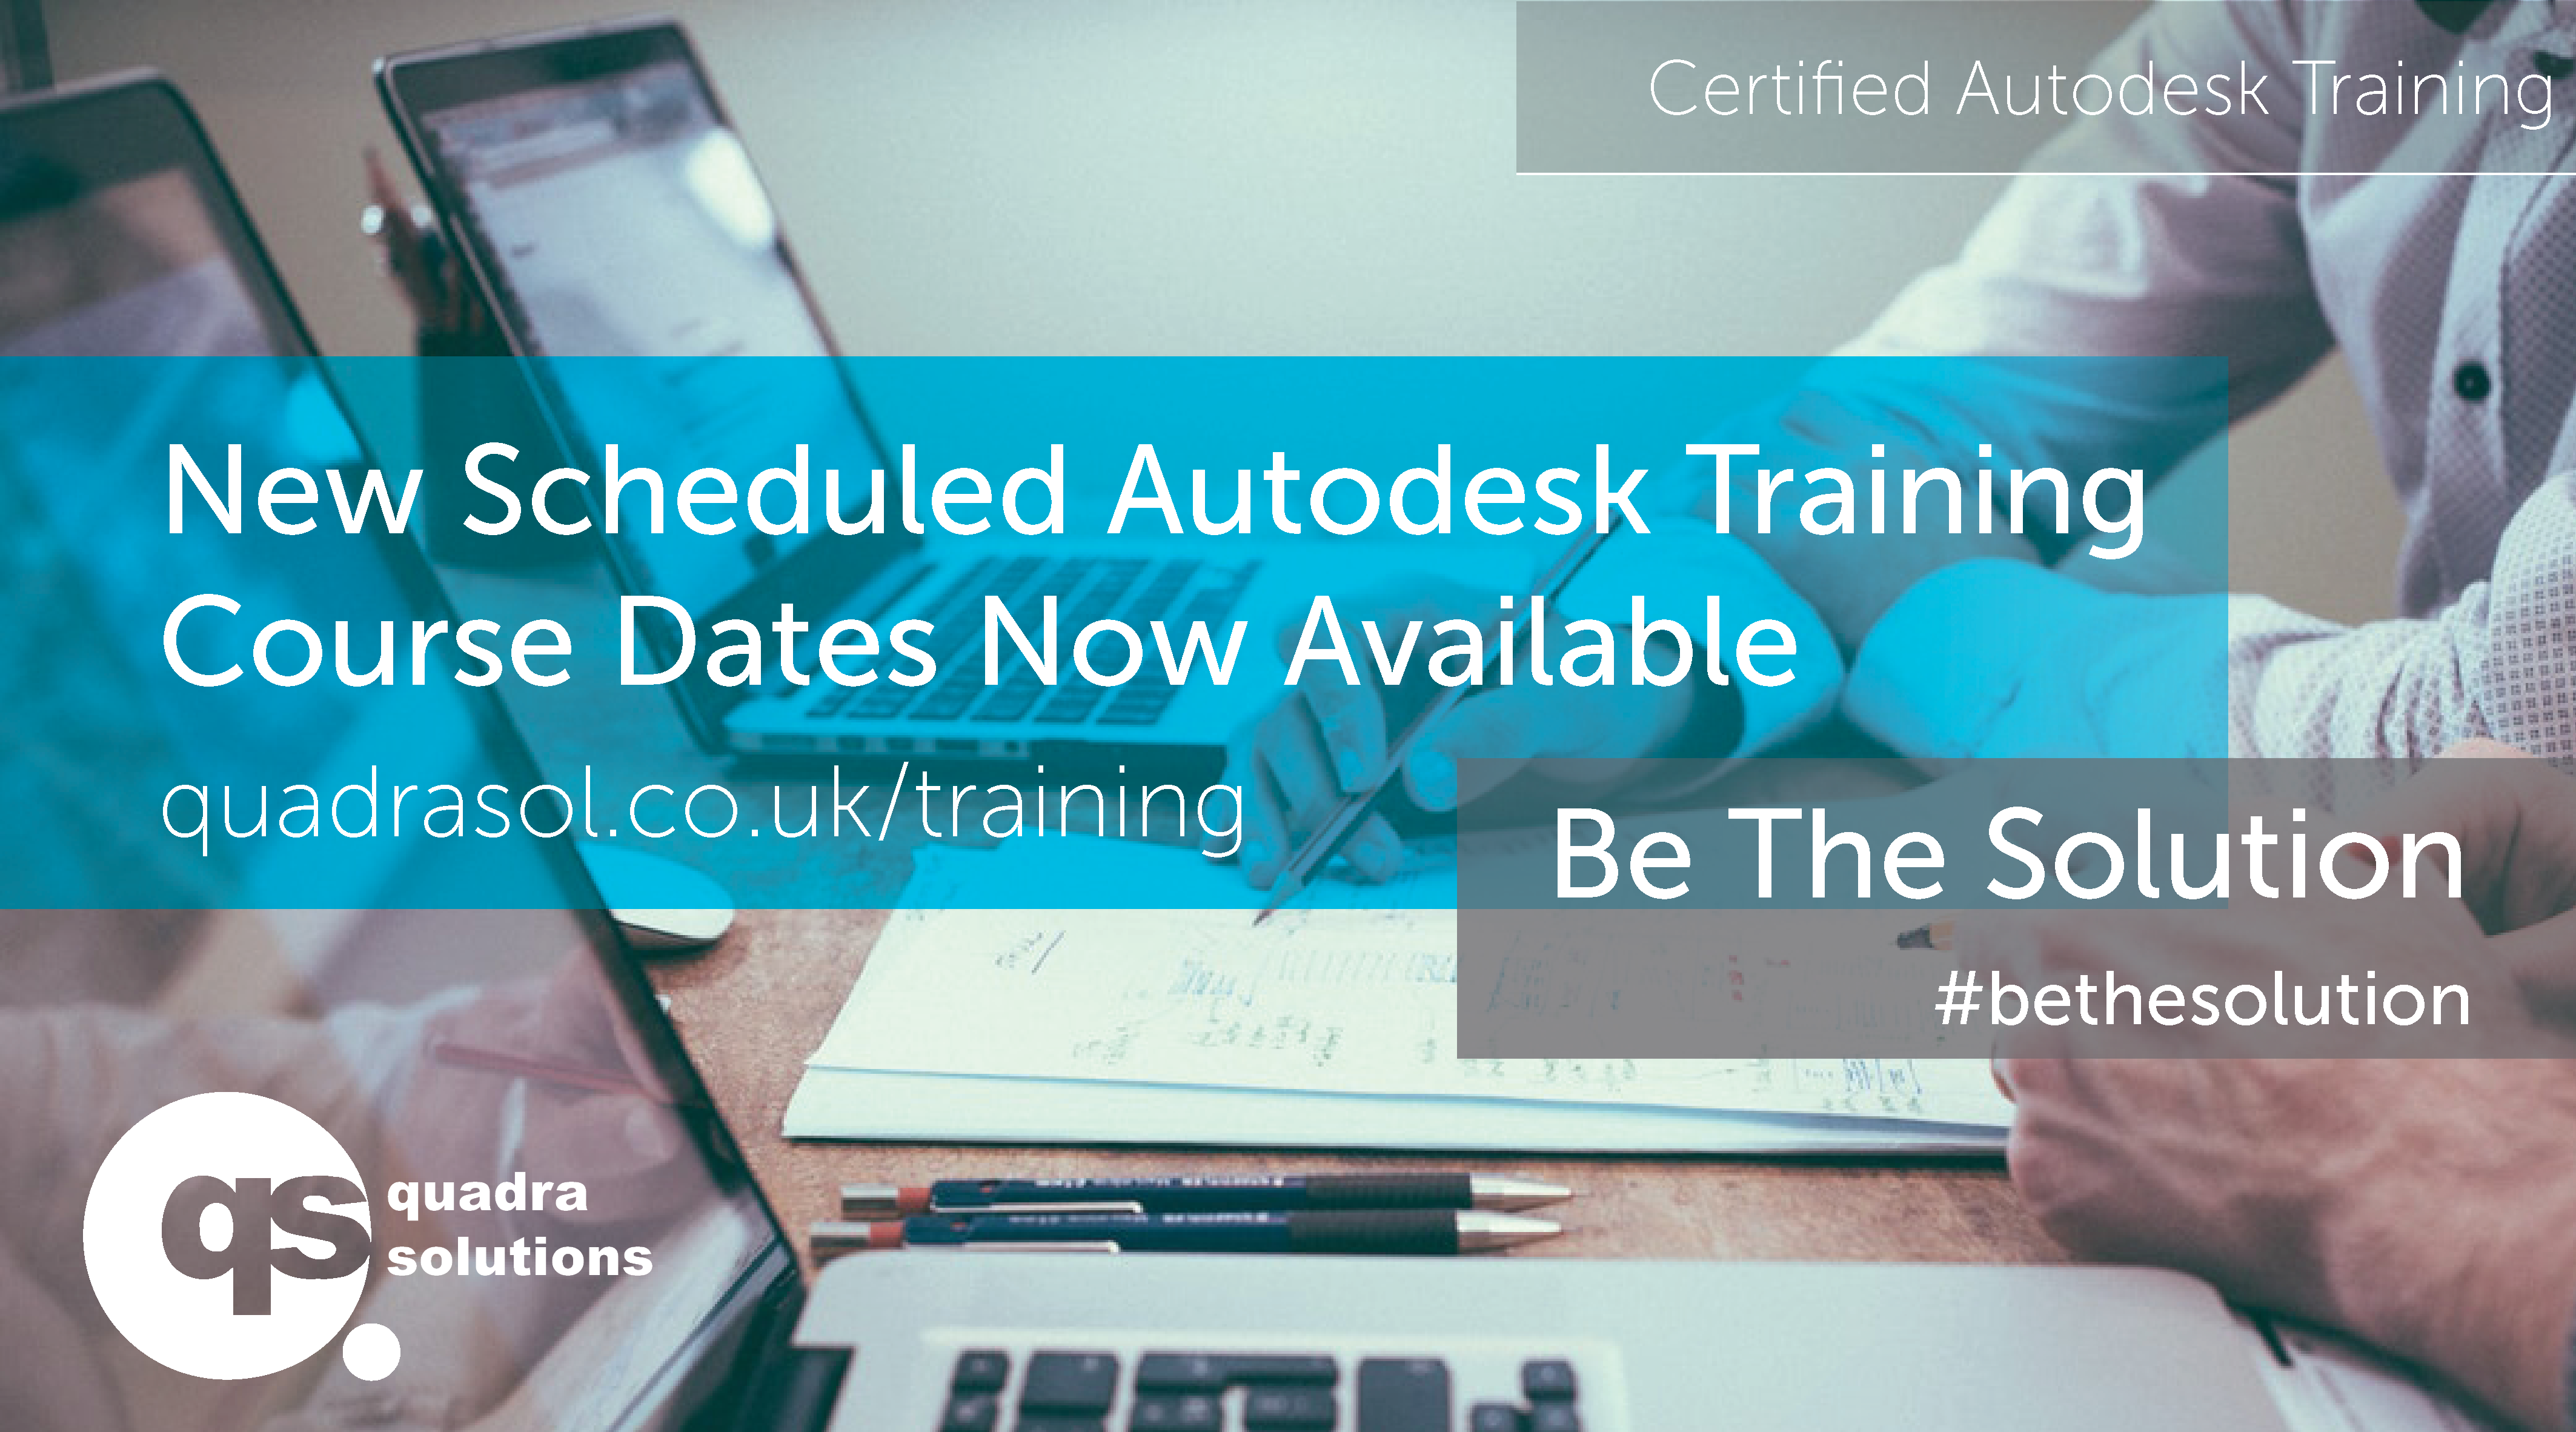 New Scheduled Autodesk Courses Announced